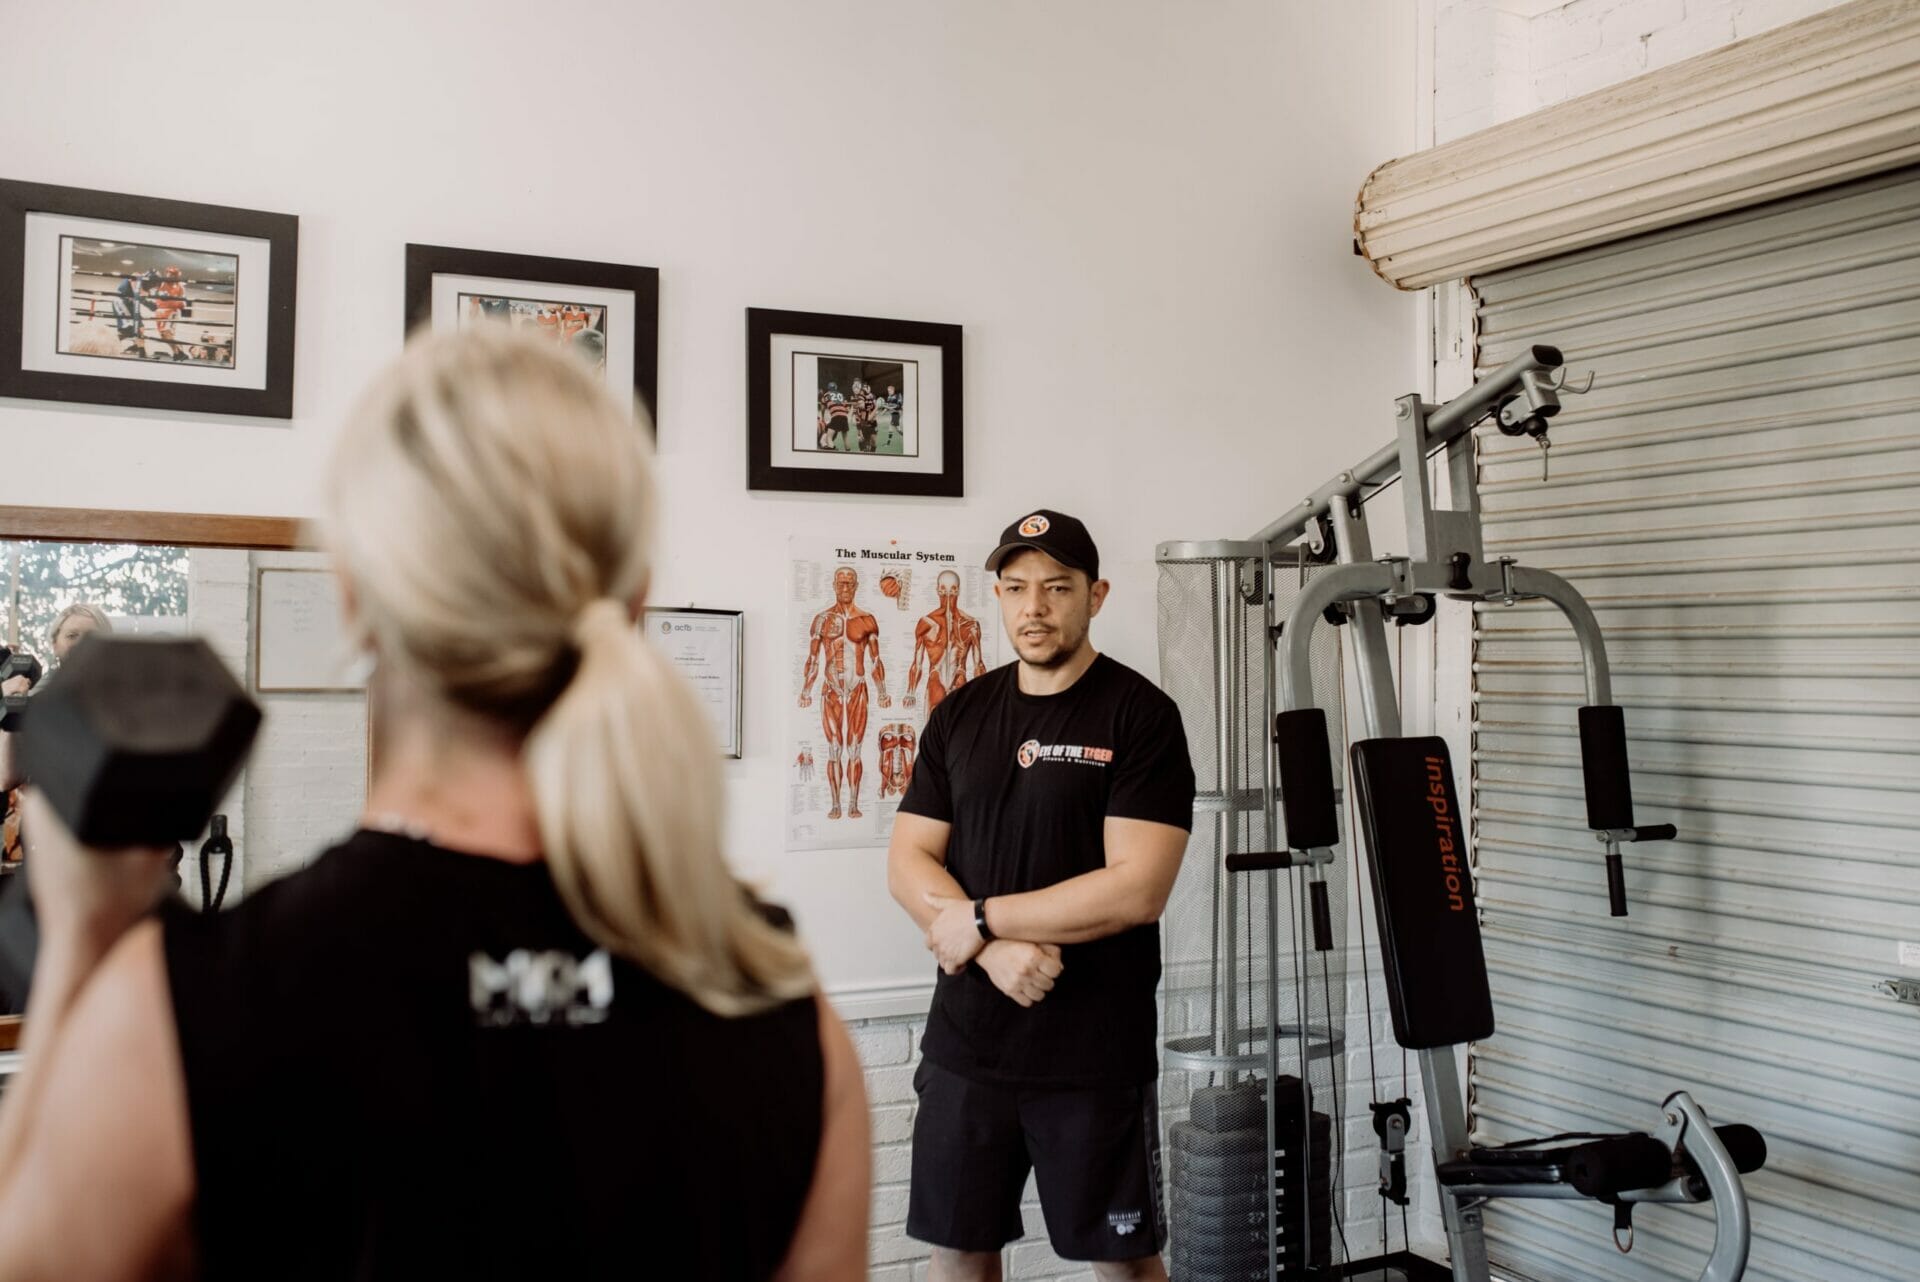 Feel safe in a trusting training setting at the Eye of the Tiger Fitness private studio in Bateau Bay